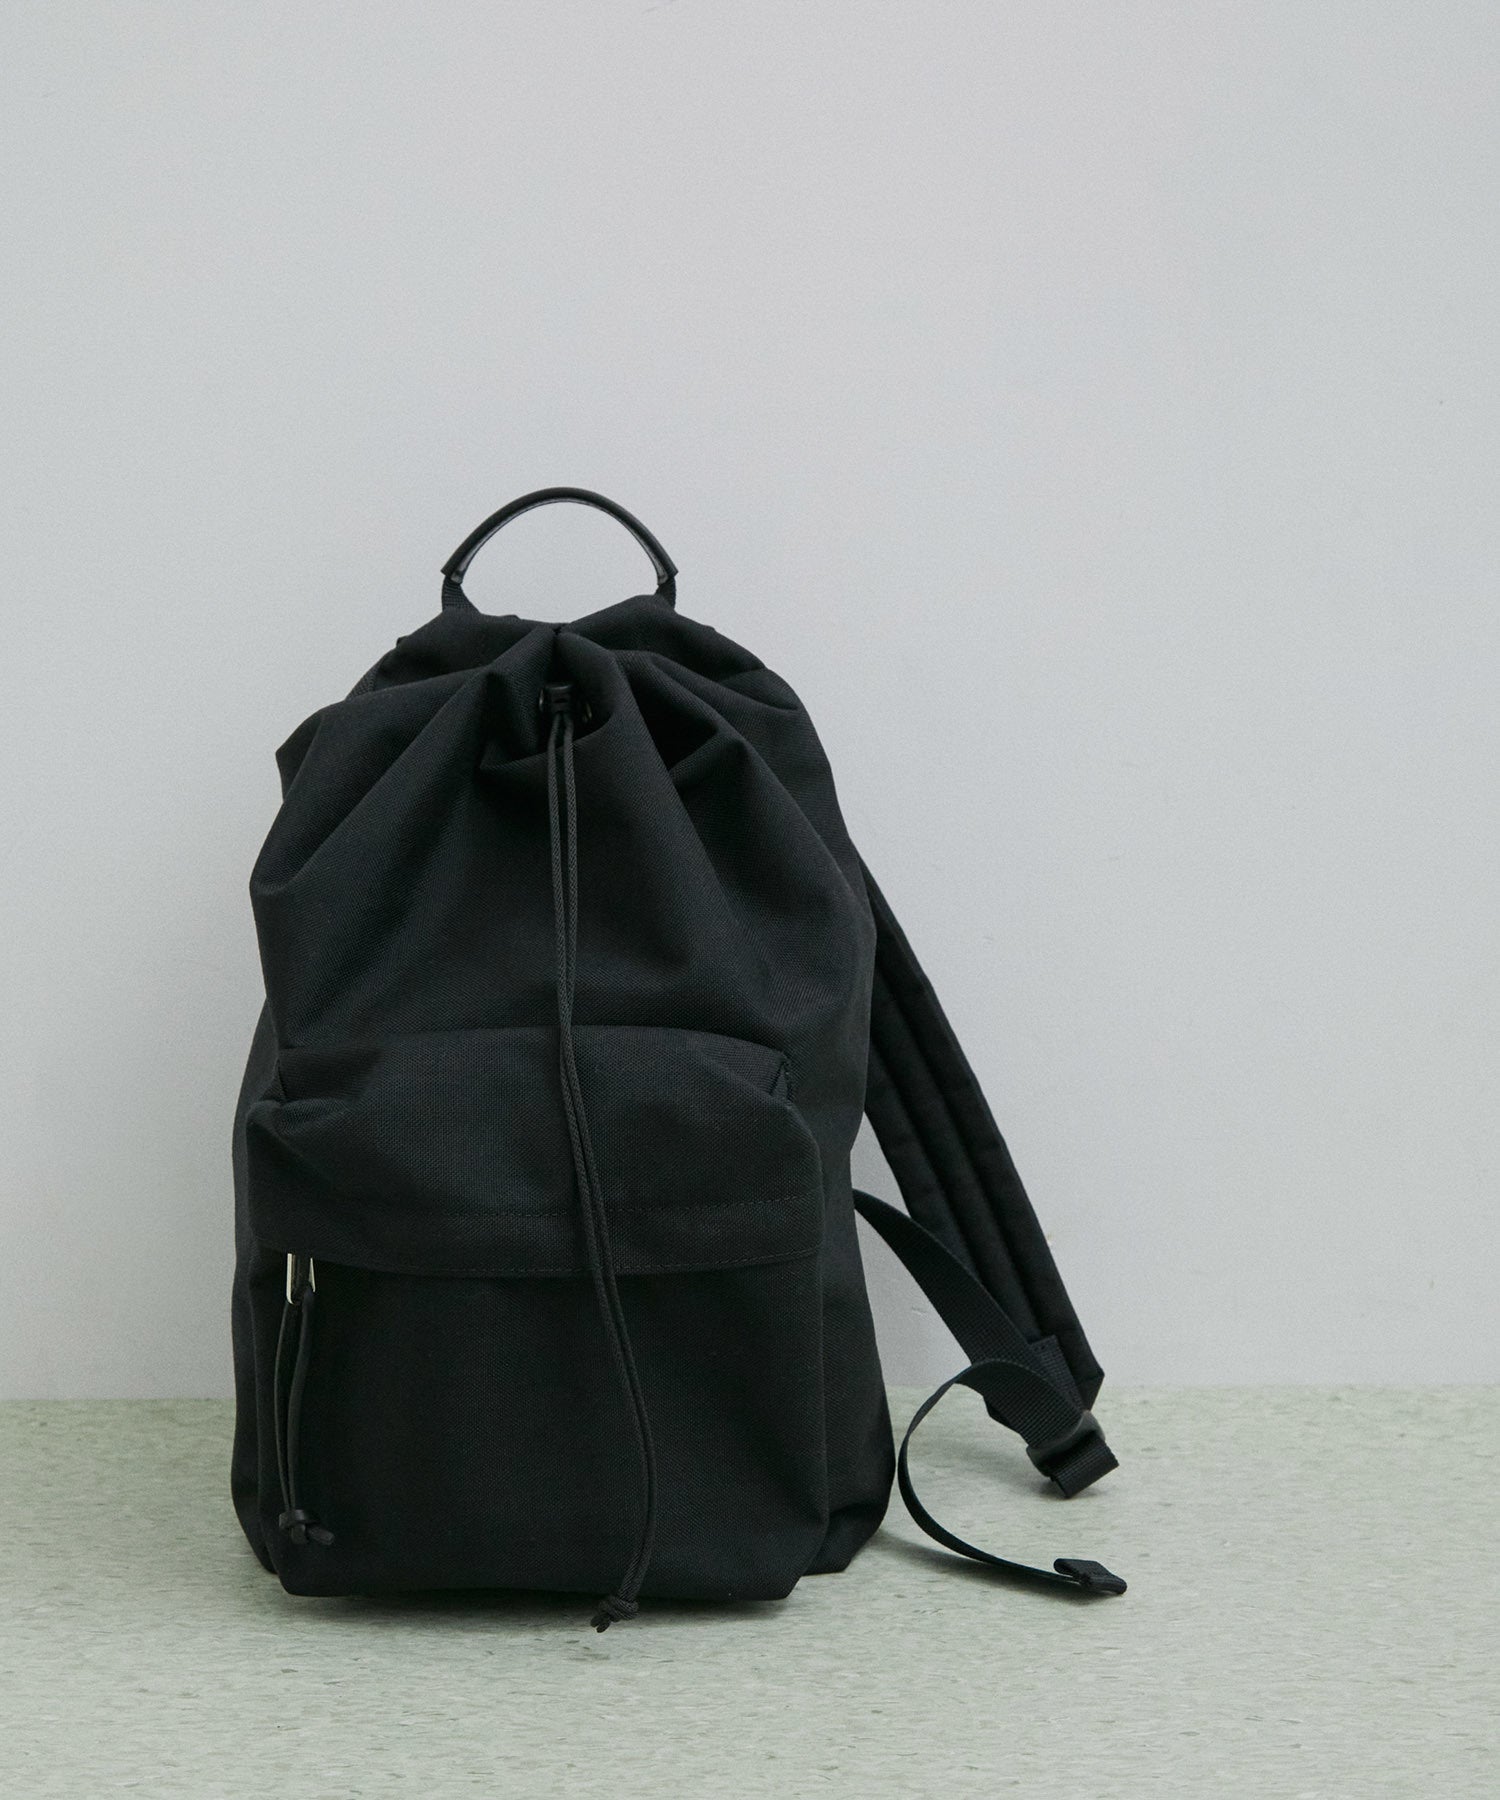 AURALEE MALL BACKPACK SET MADE BY AETA - リュック/バックパック